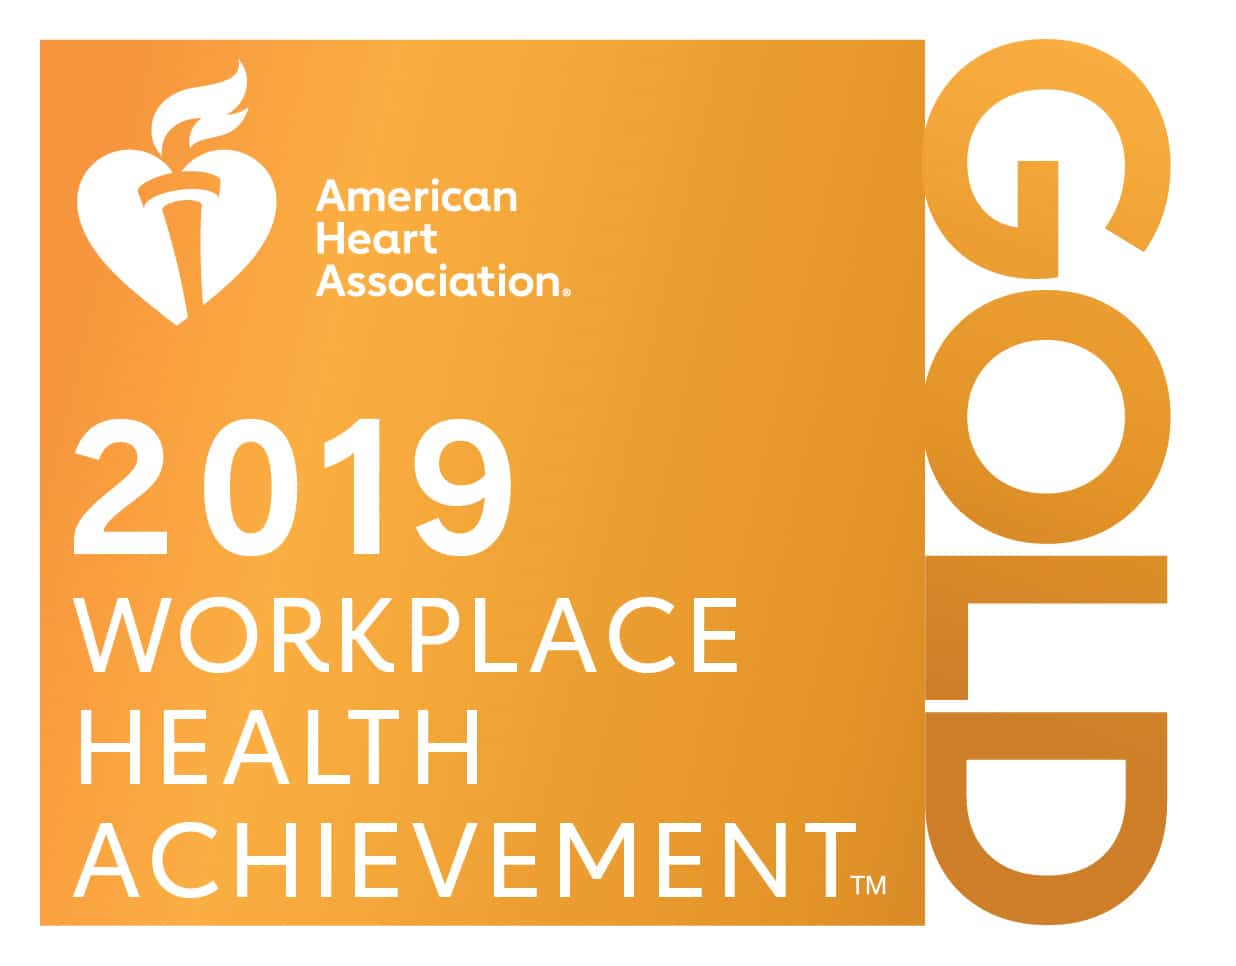 American Heart Association Recognizes Huntington Hospital With Gold Level Workplace Health Achievement for 2nd Year in a Row